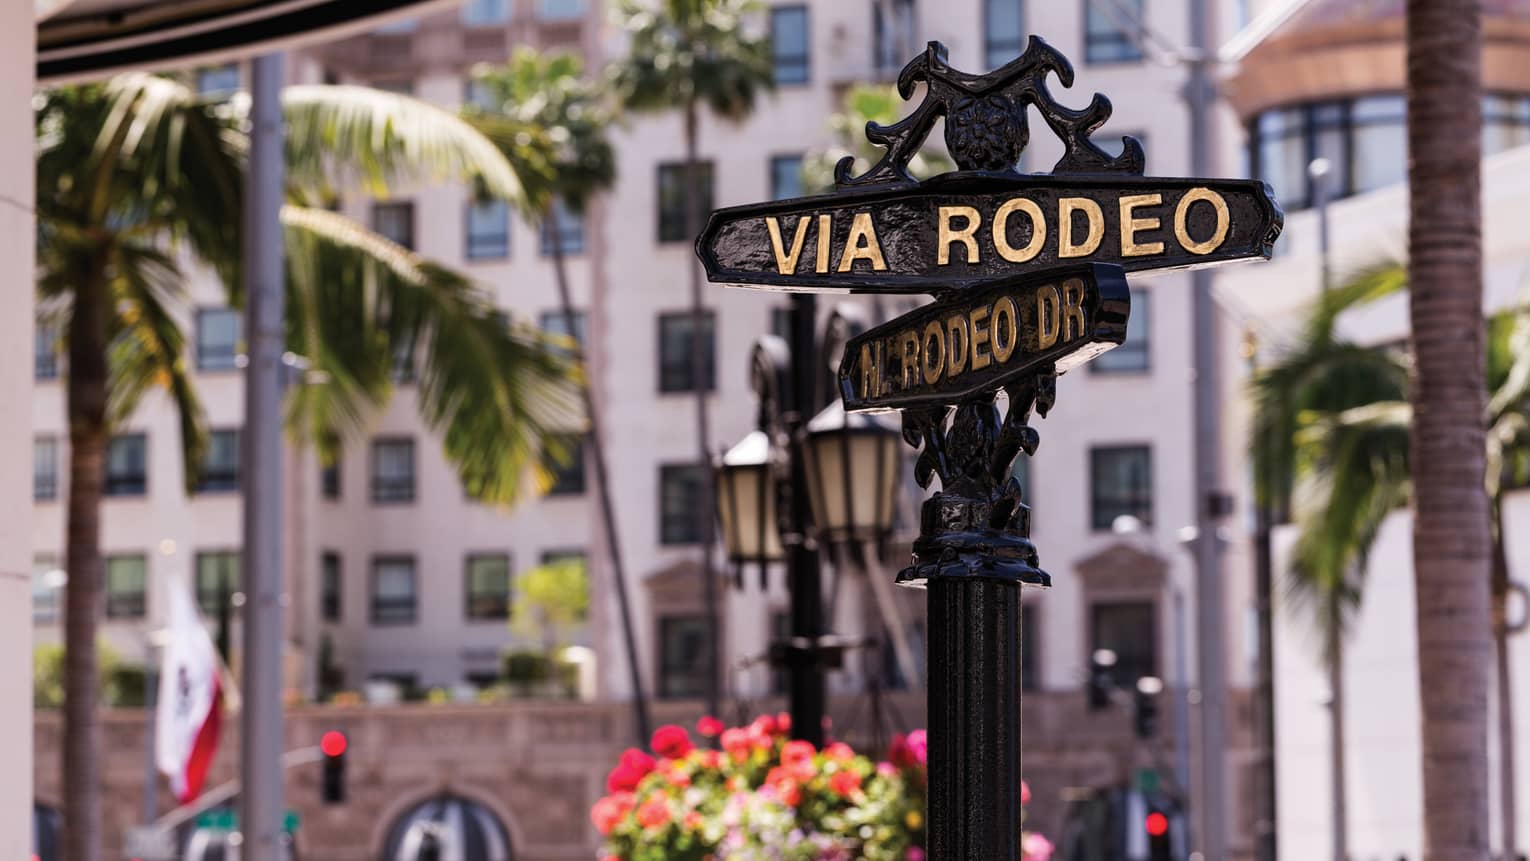 Wrought iron post with Rodeo Drive street signs, palm trees and flowers in background